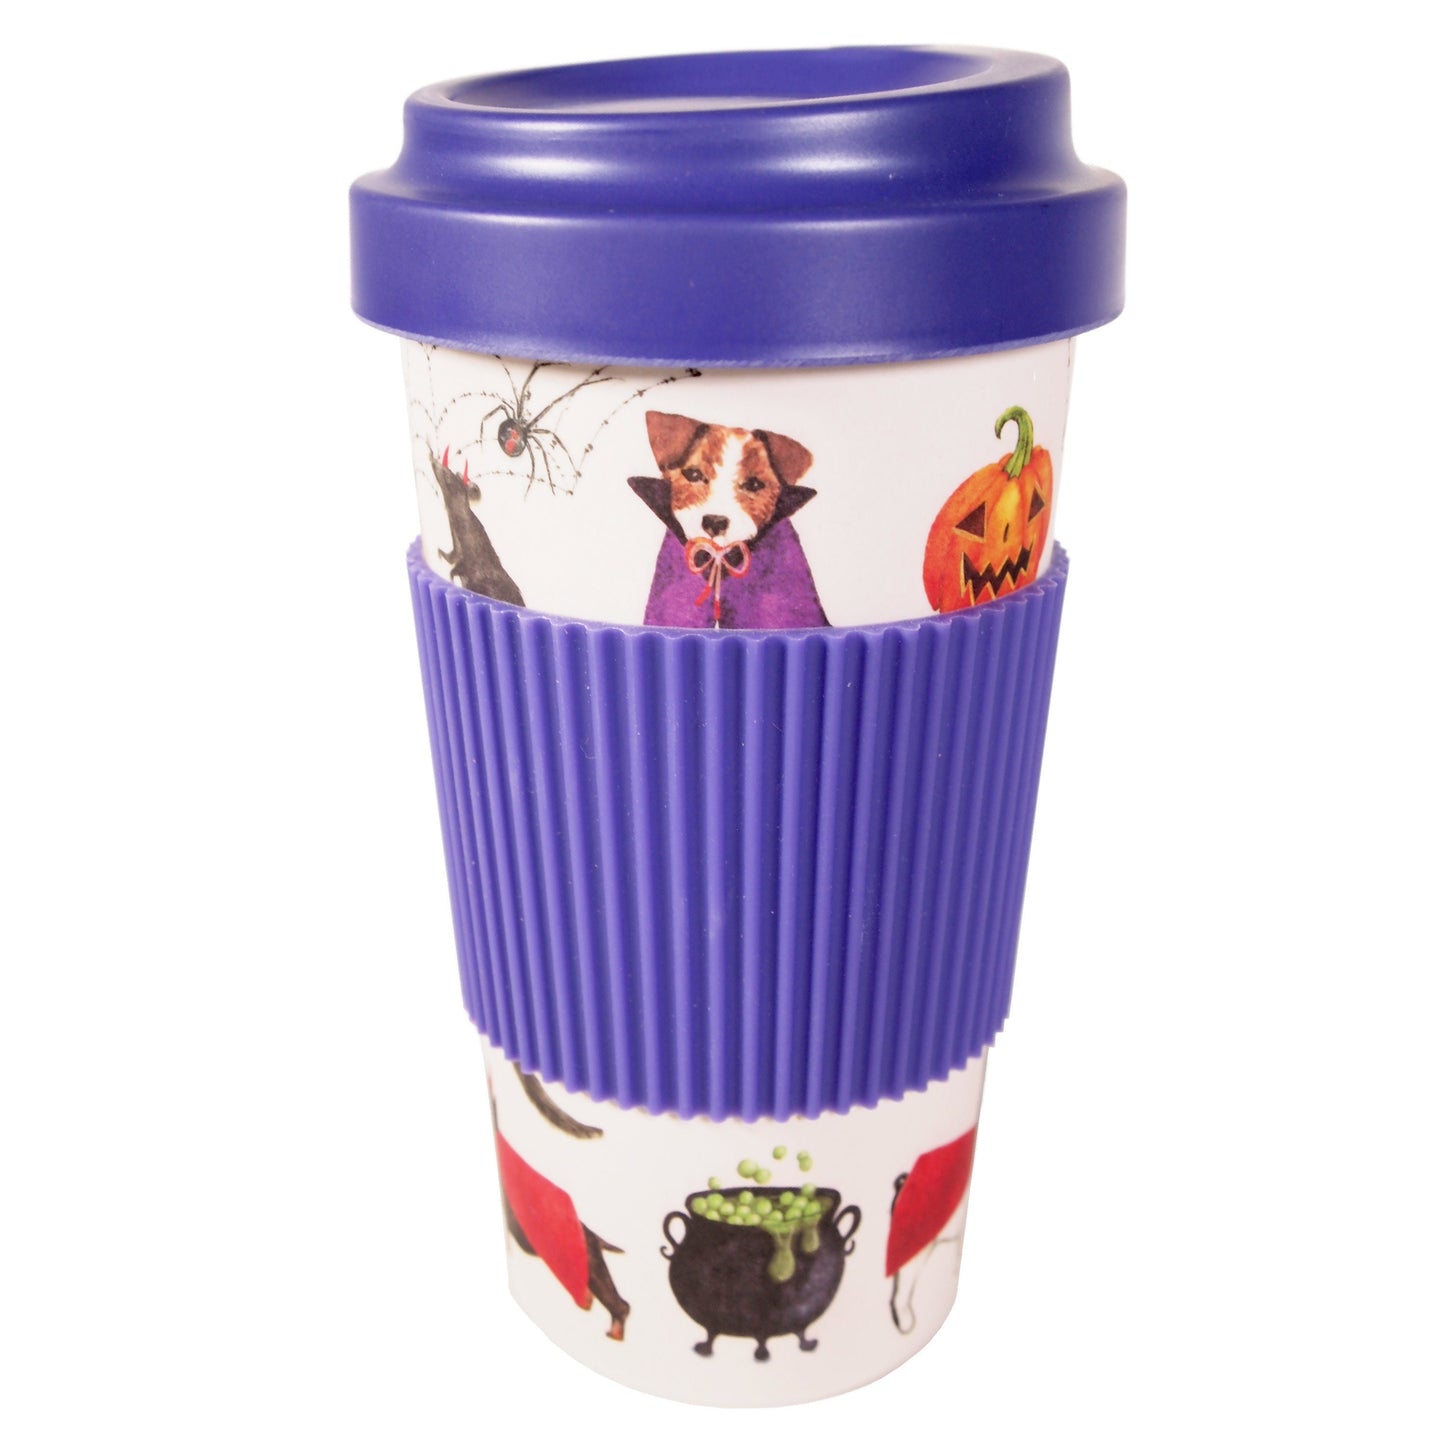 Dog and Cat Themed Travel Cup : Dogs and Cats in Halloween Costumes! - BPA Free